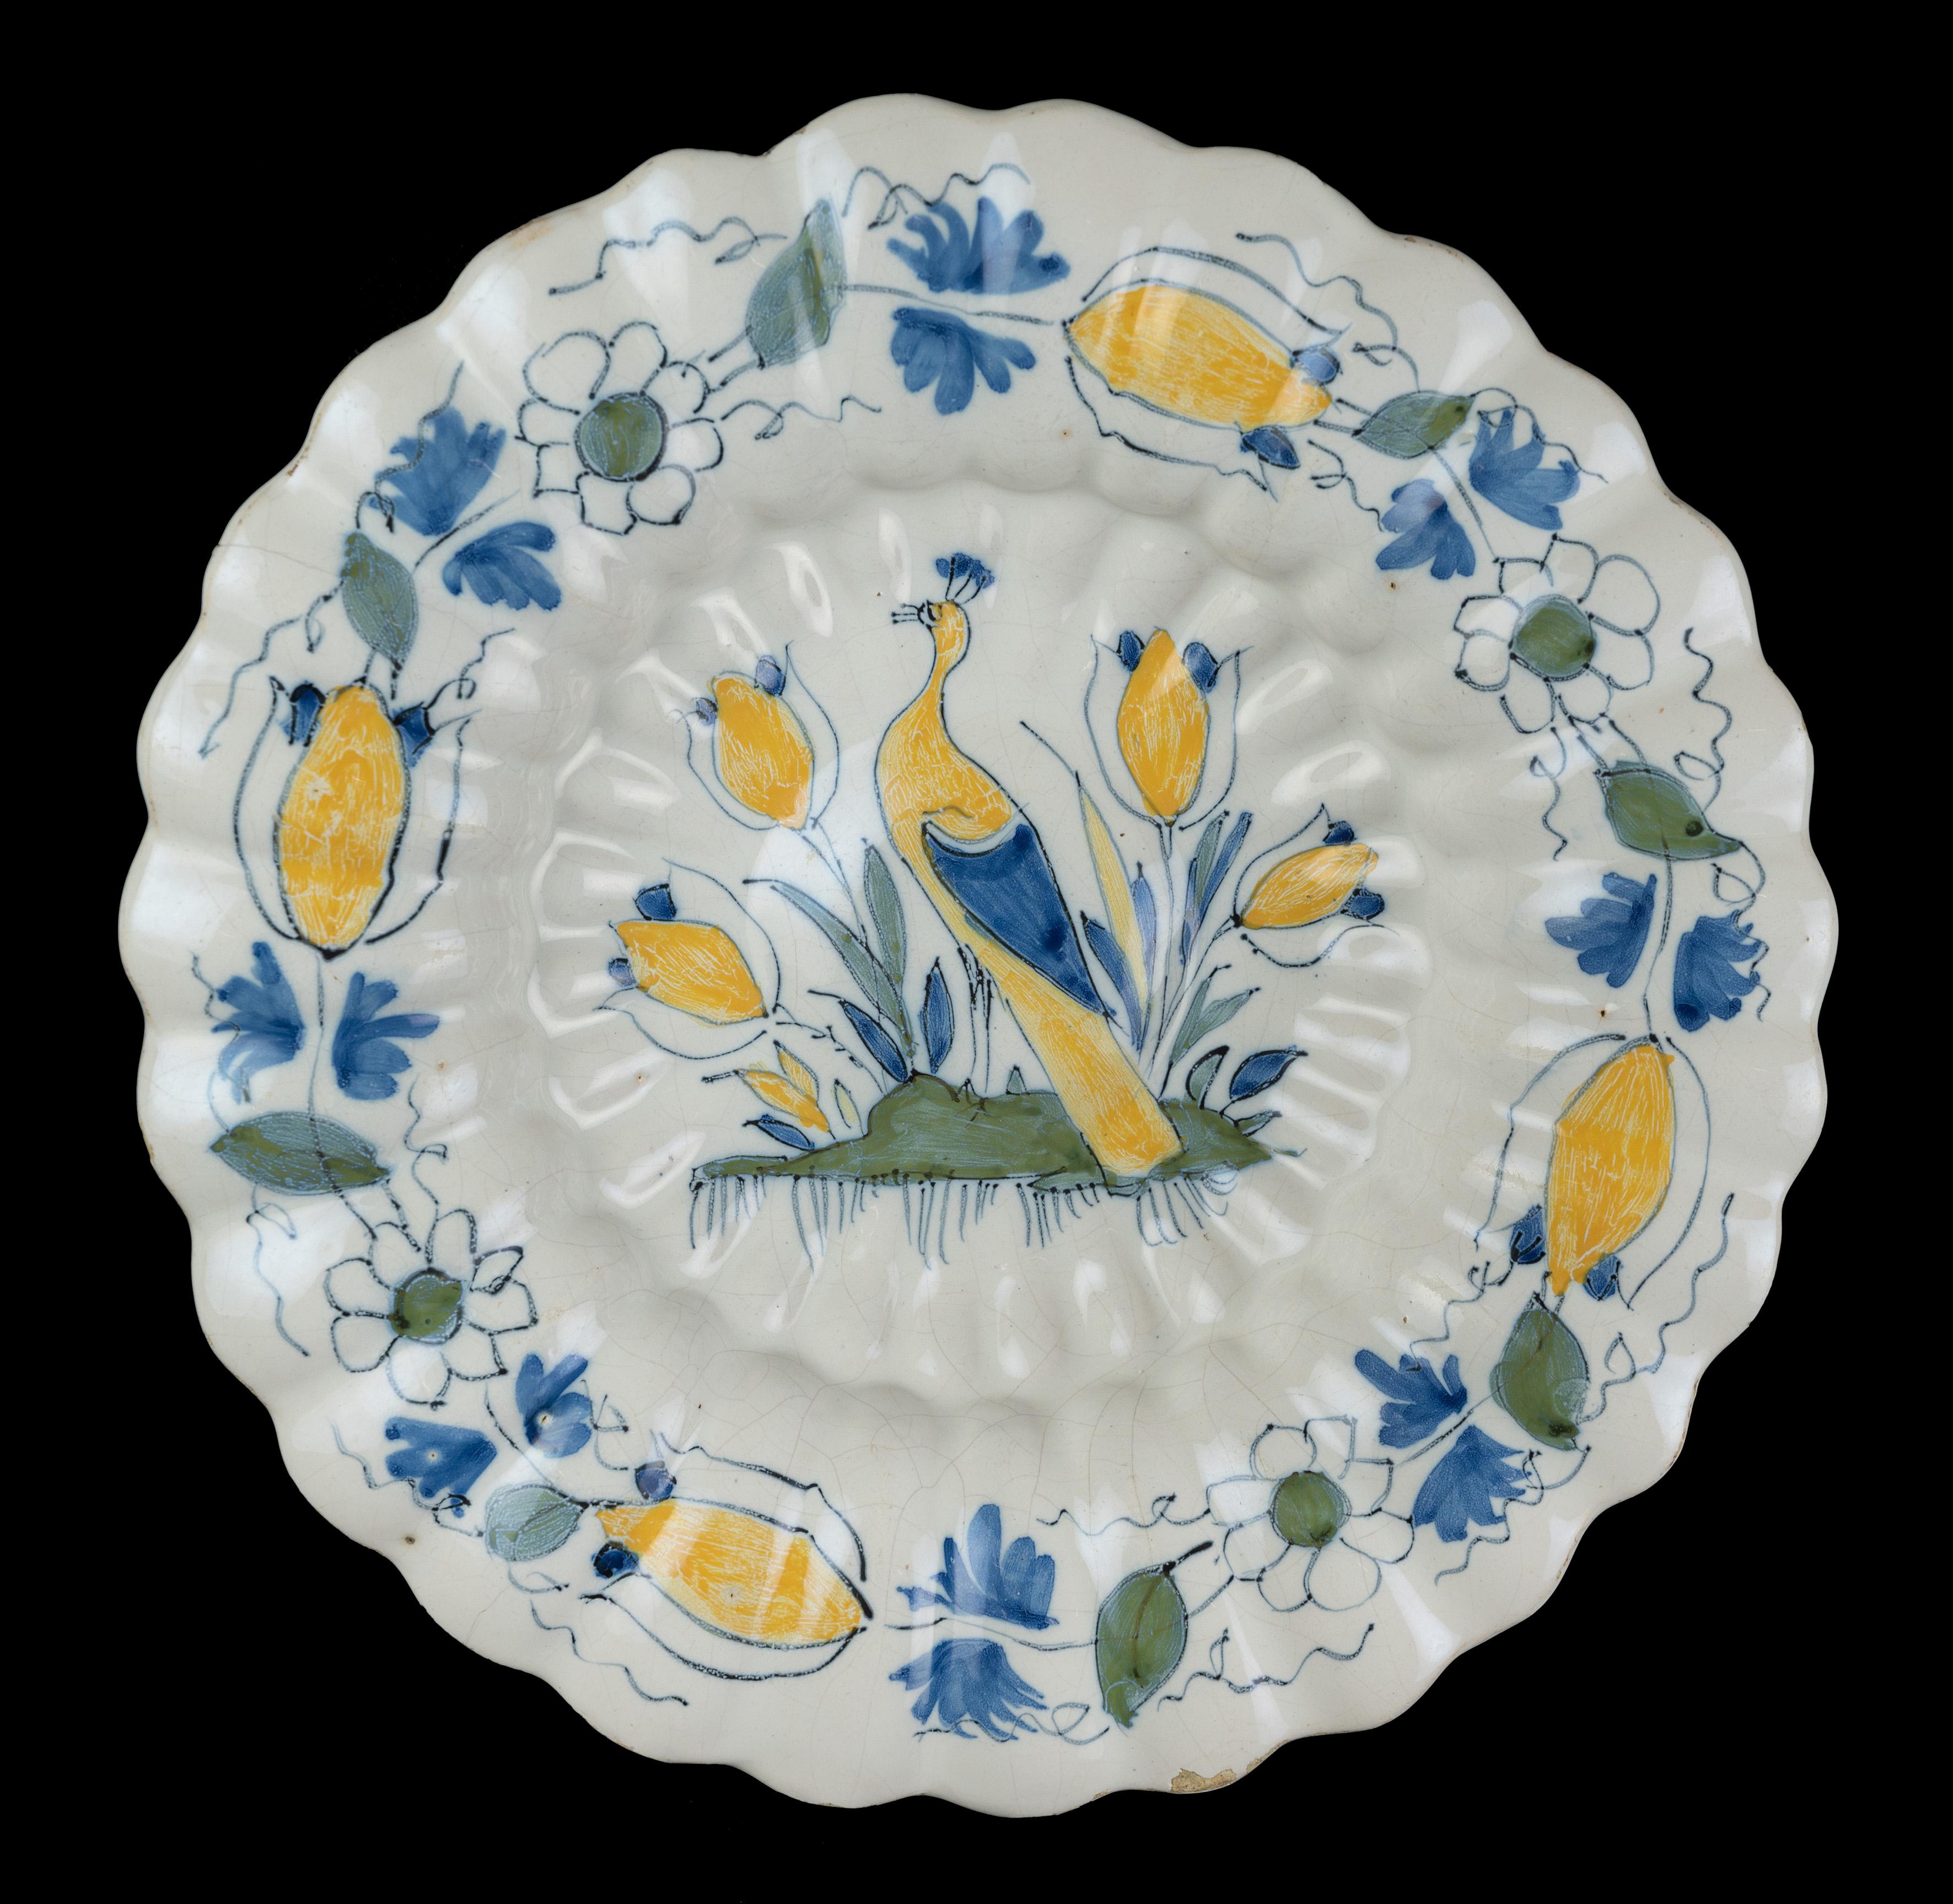 Polychrome lobed dish with peacock and tulips. Delft, circa 1690.
Dimensions: diameter 33,5 cm / 13.18 in.

The polychrome lobed dish is composed of twenty-seven double lobes and is painted in the centre with a peacock between four tulips on a